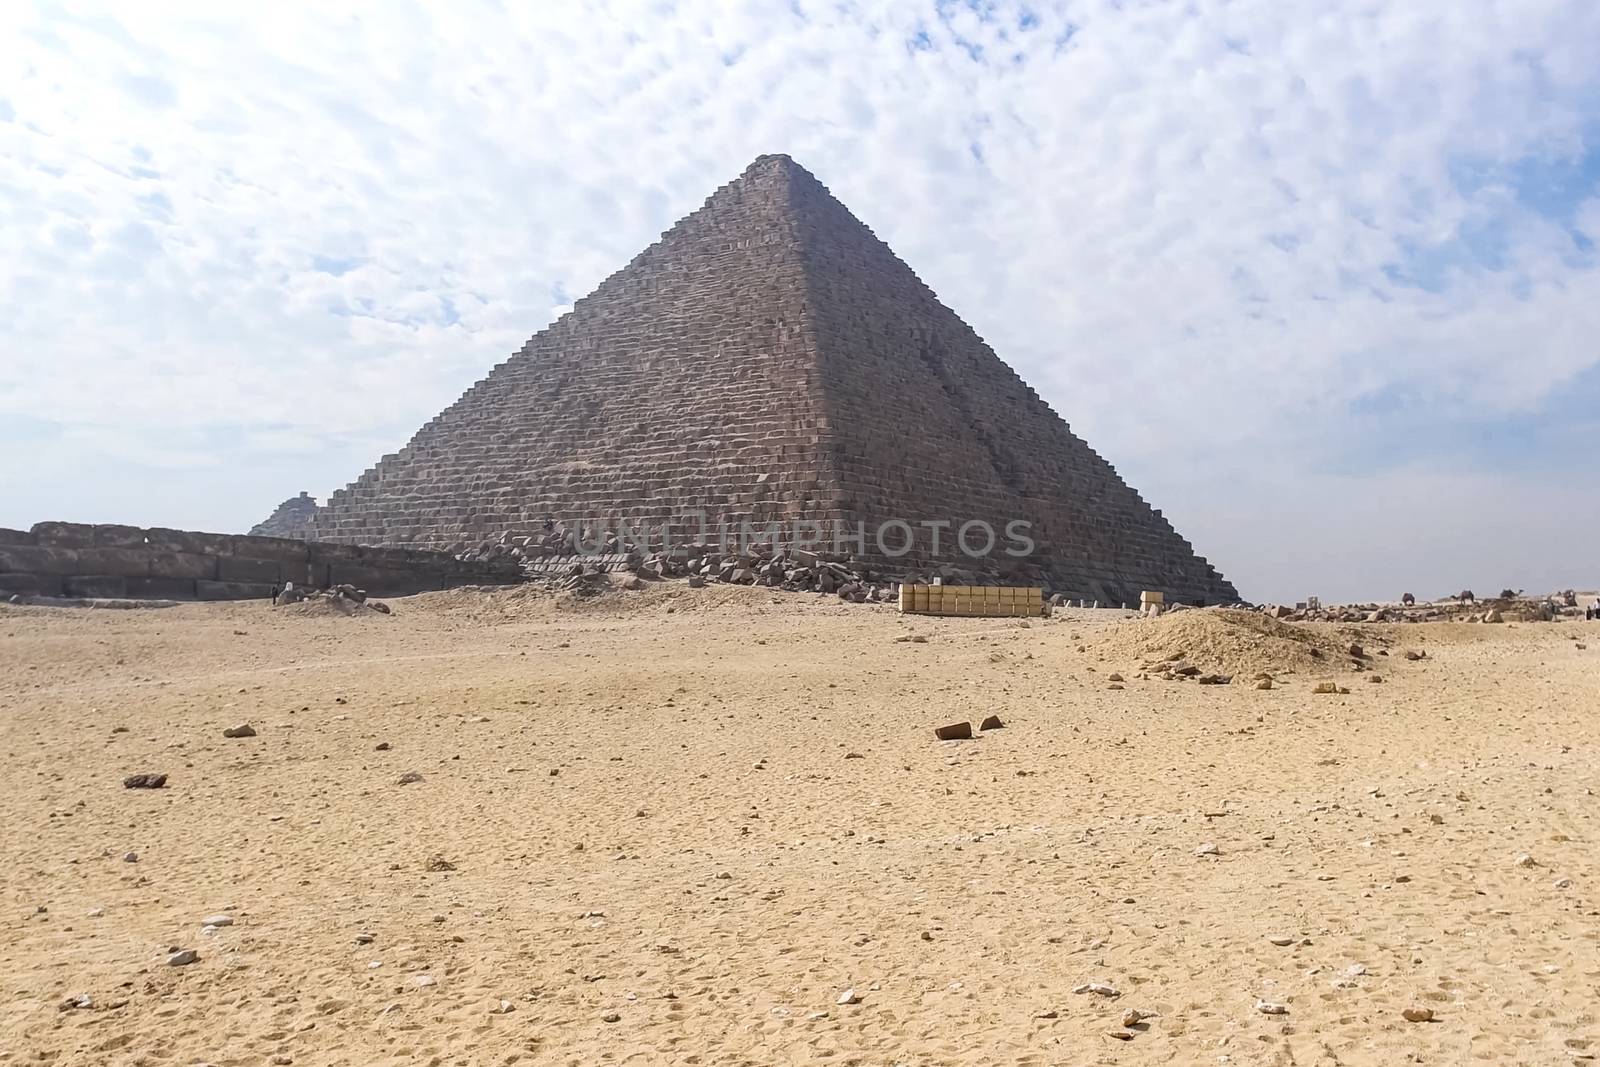 Pyramids of giza. Great pyramids of Egypt. The seventh wonder of the world. Ancient megaliths. by nyrok